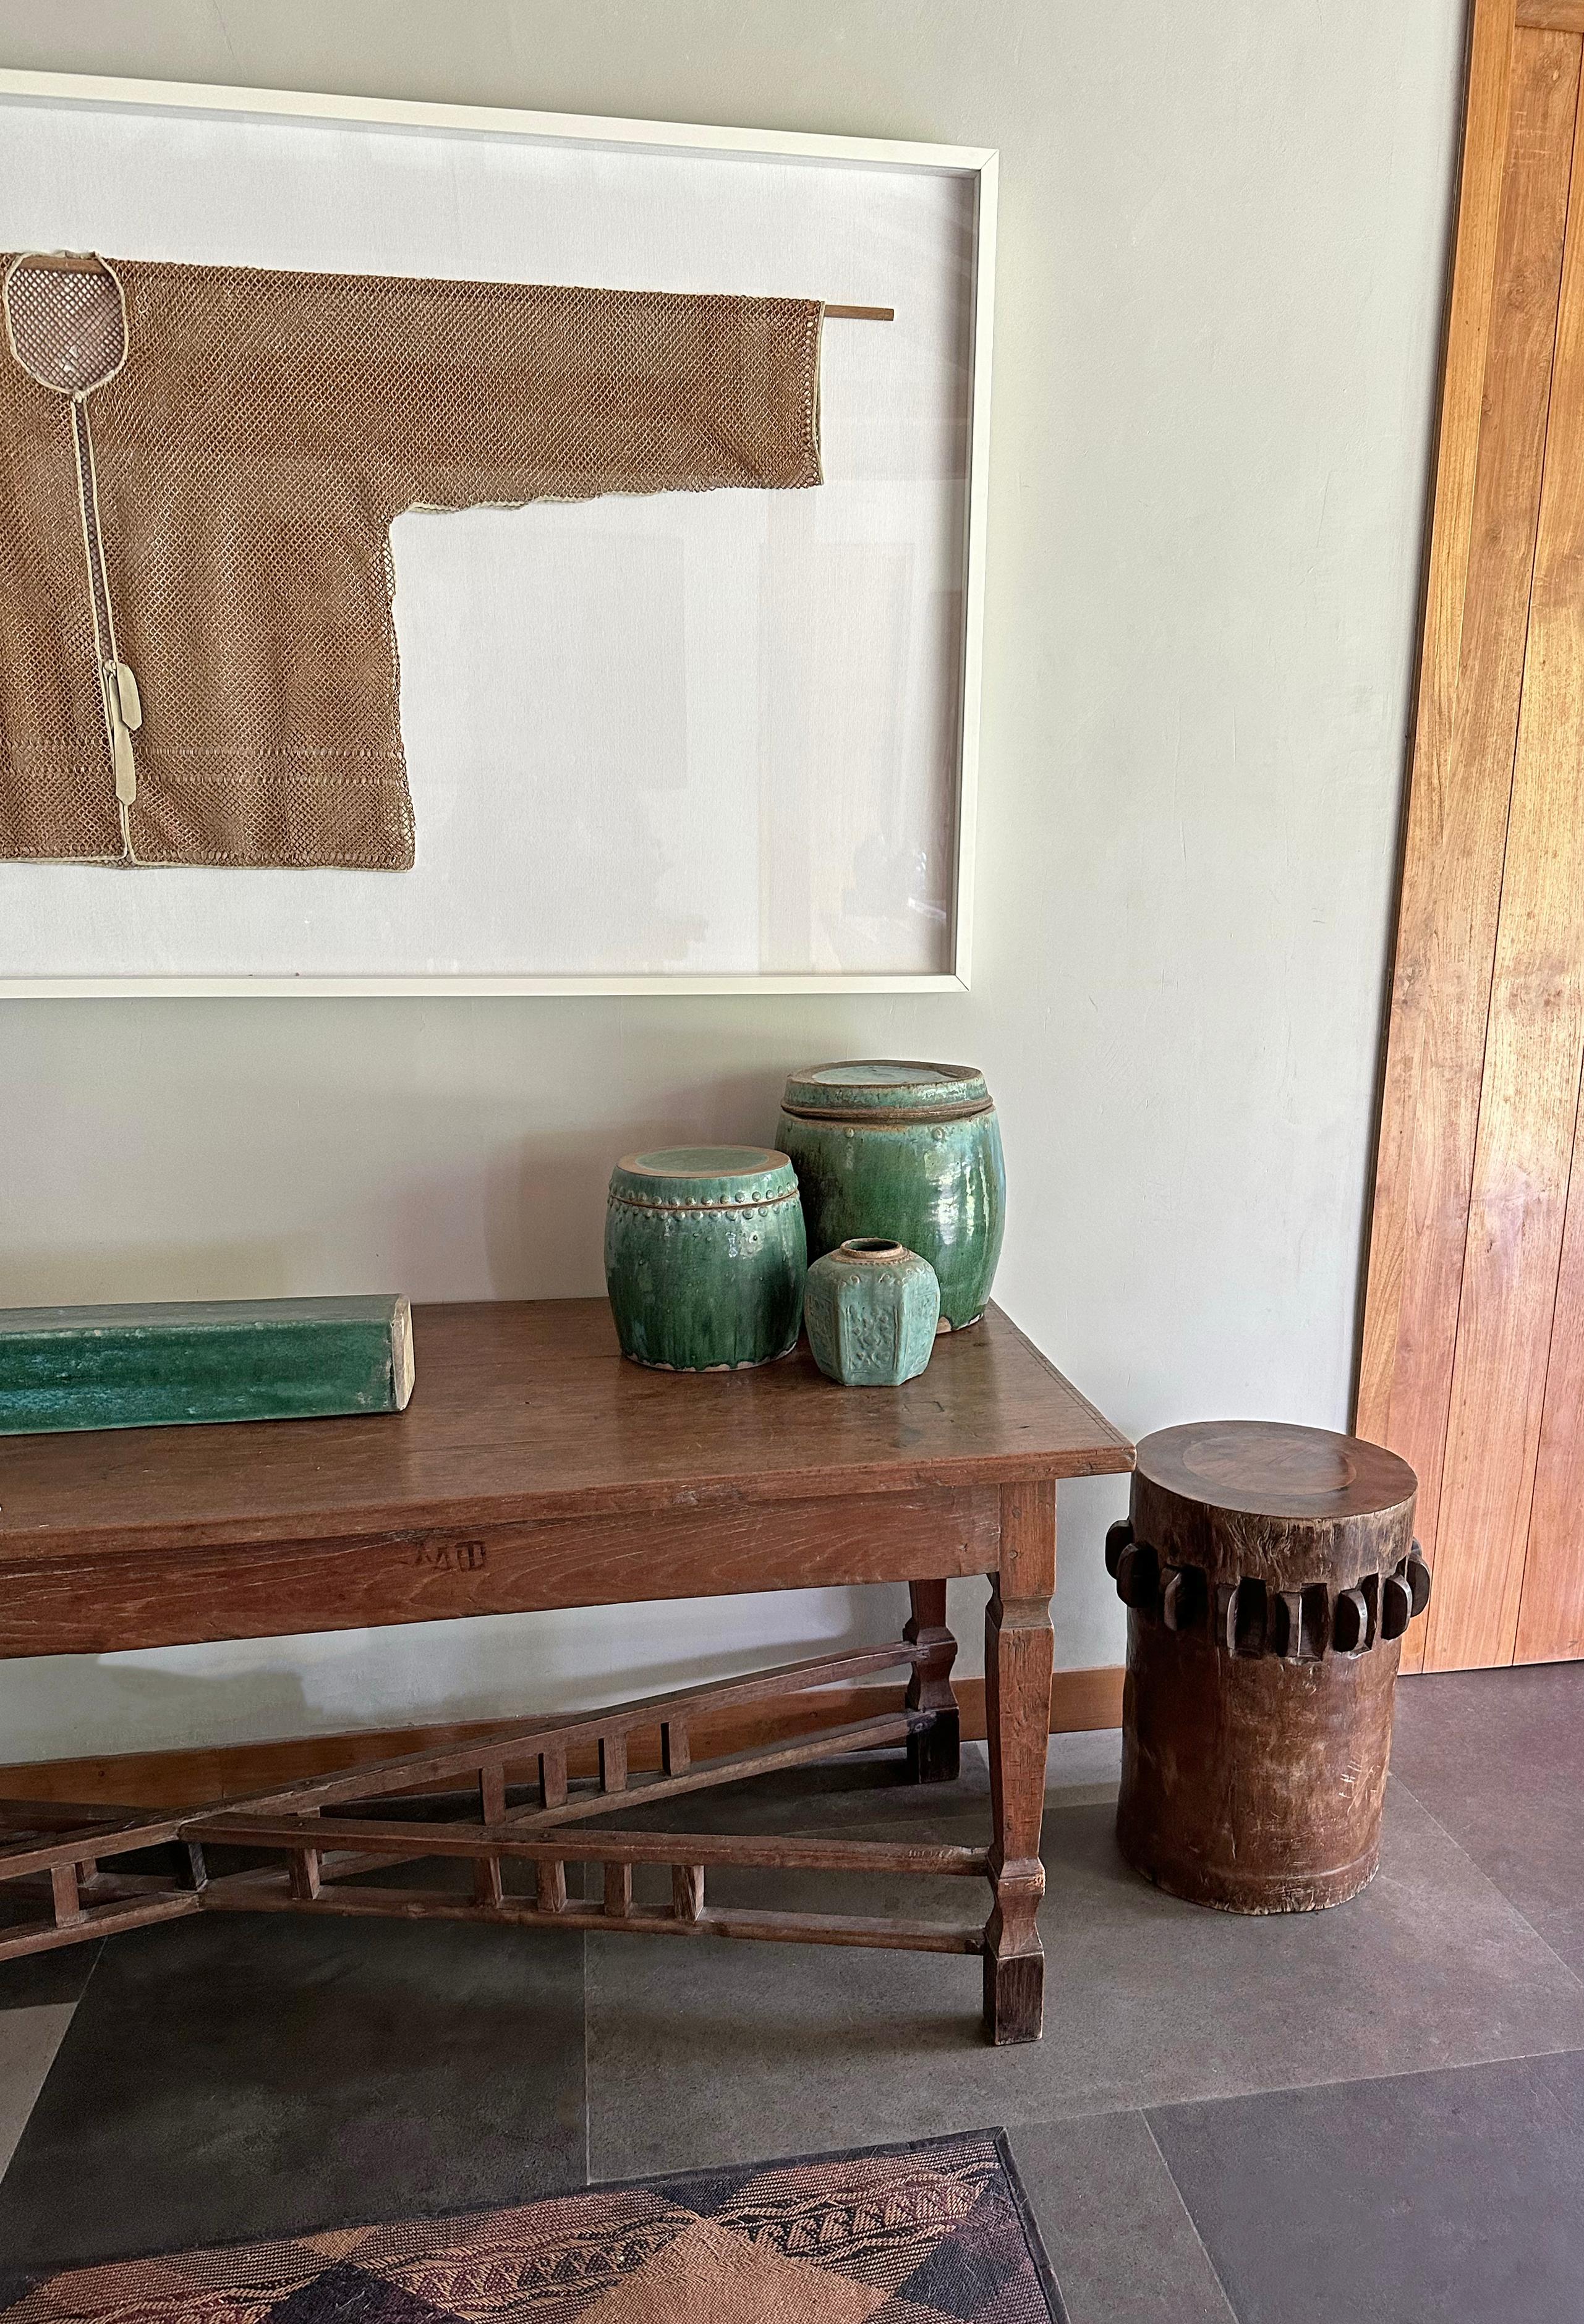 This solid crusher was part of a larger sugar cane press extracting the sugar rich juices from harvested sugar cane. Hand-carved from teak It has a smooth finish and would make for a wonderful pedestal, side table or as a sculptural object on